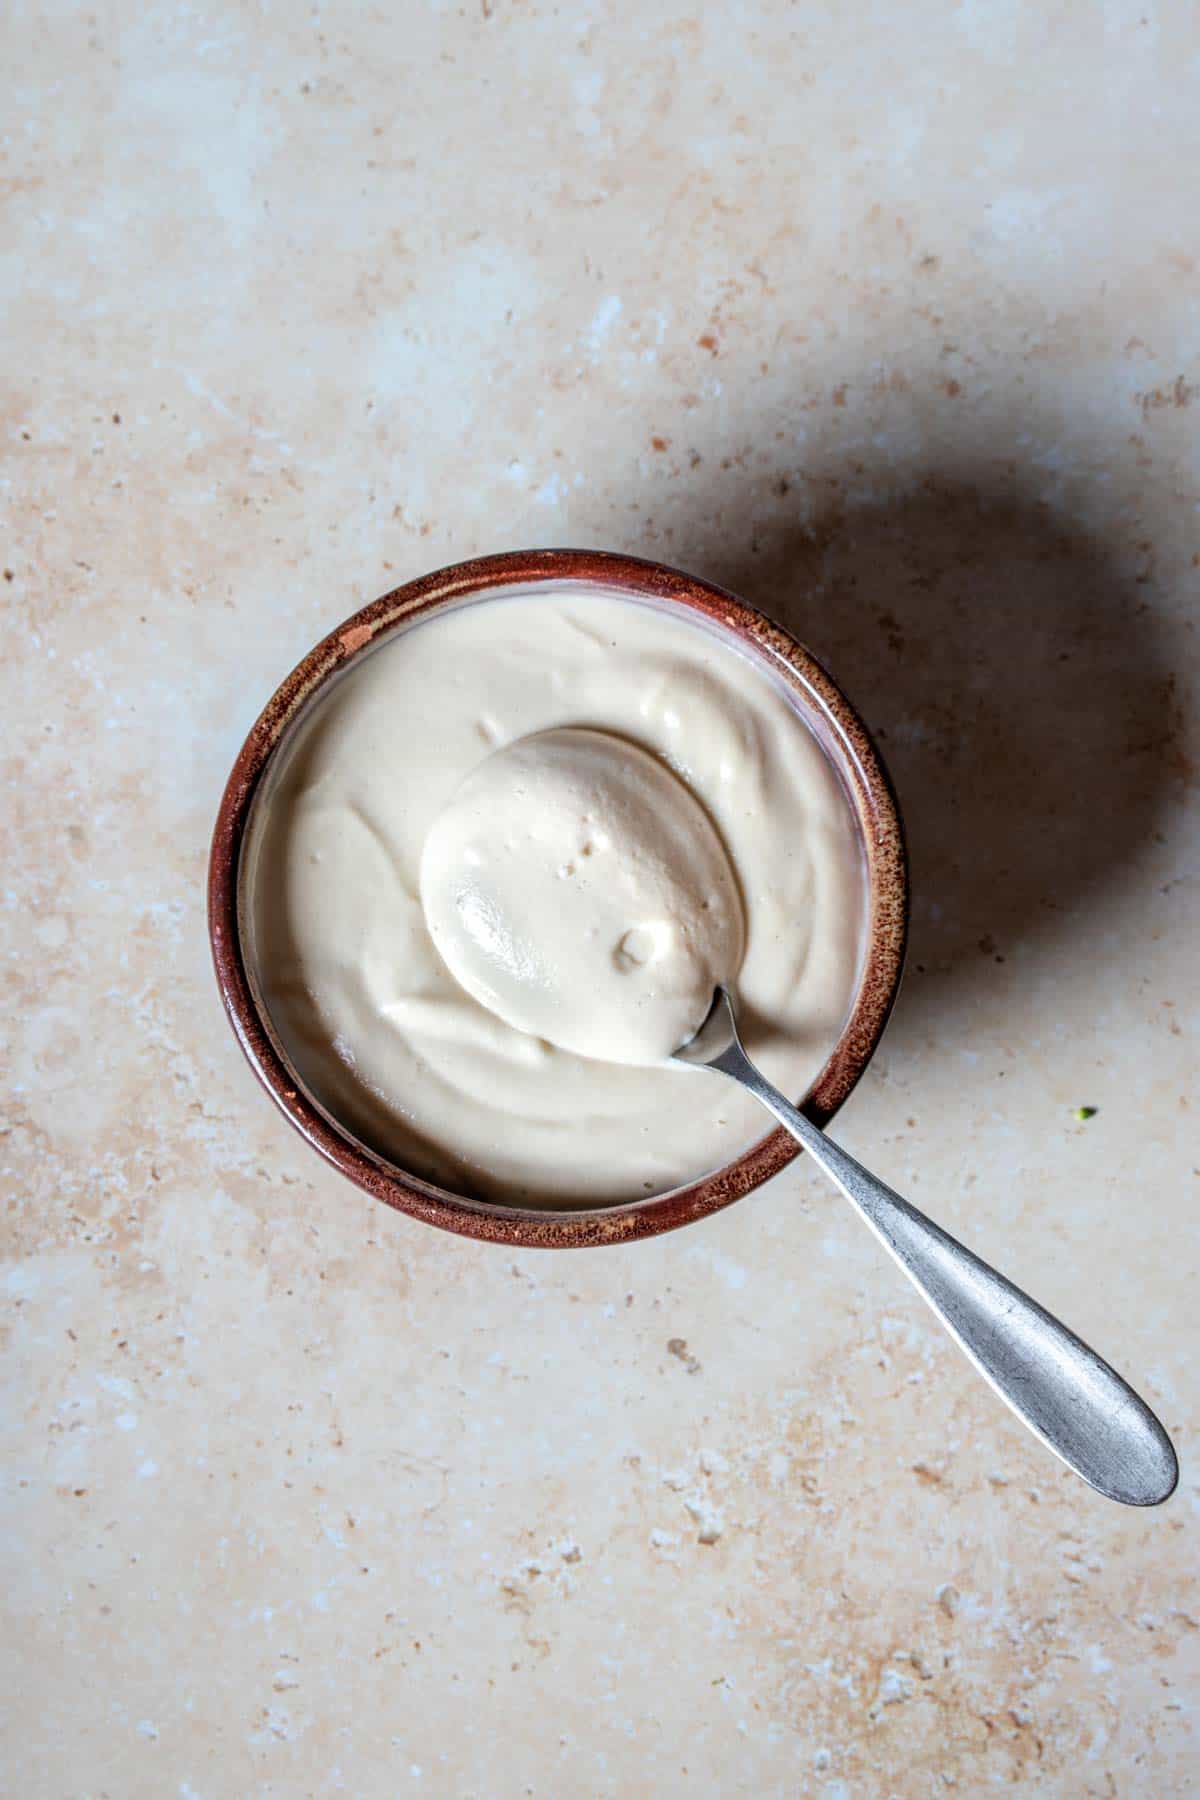 A spoon coming out of a brown bowl filled with a creamy type dressing.